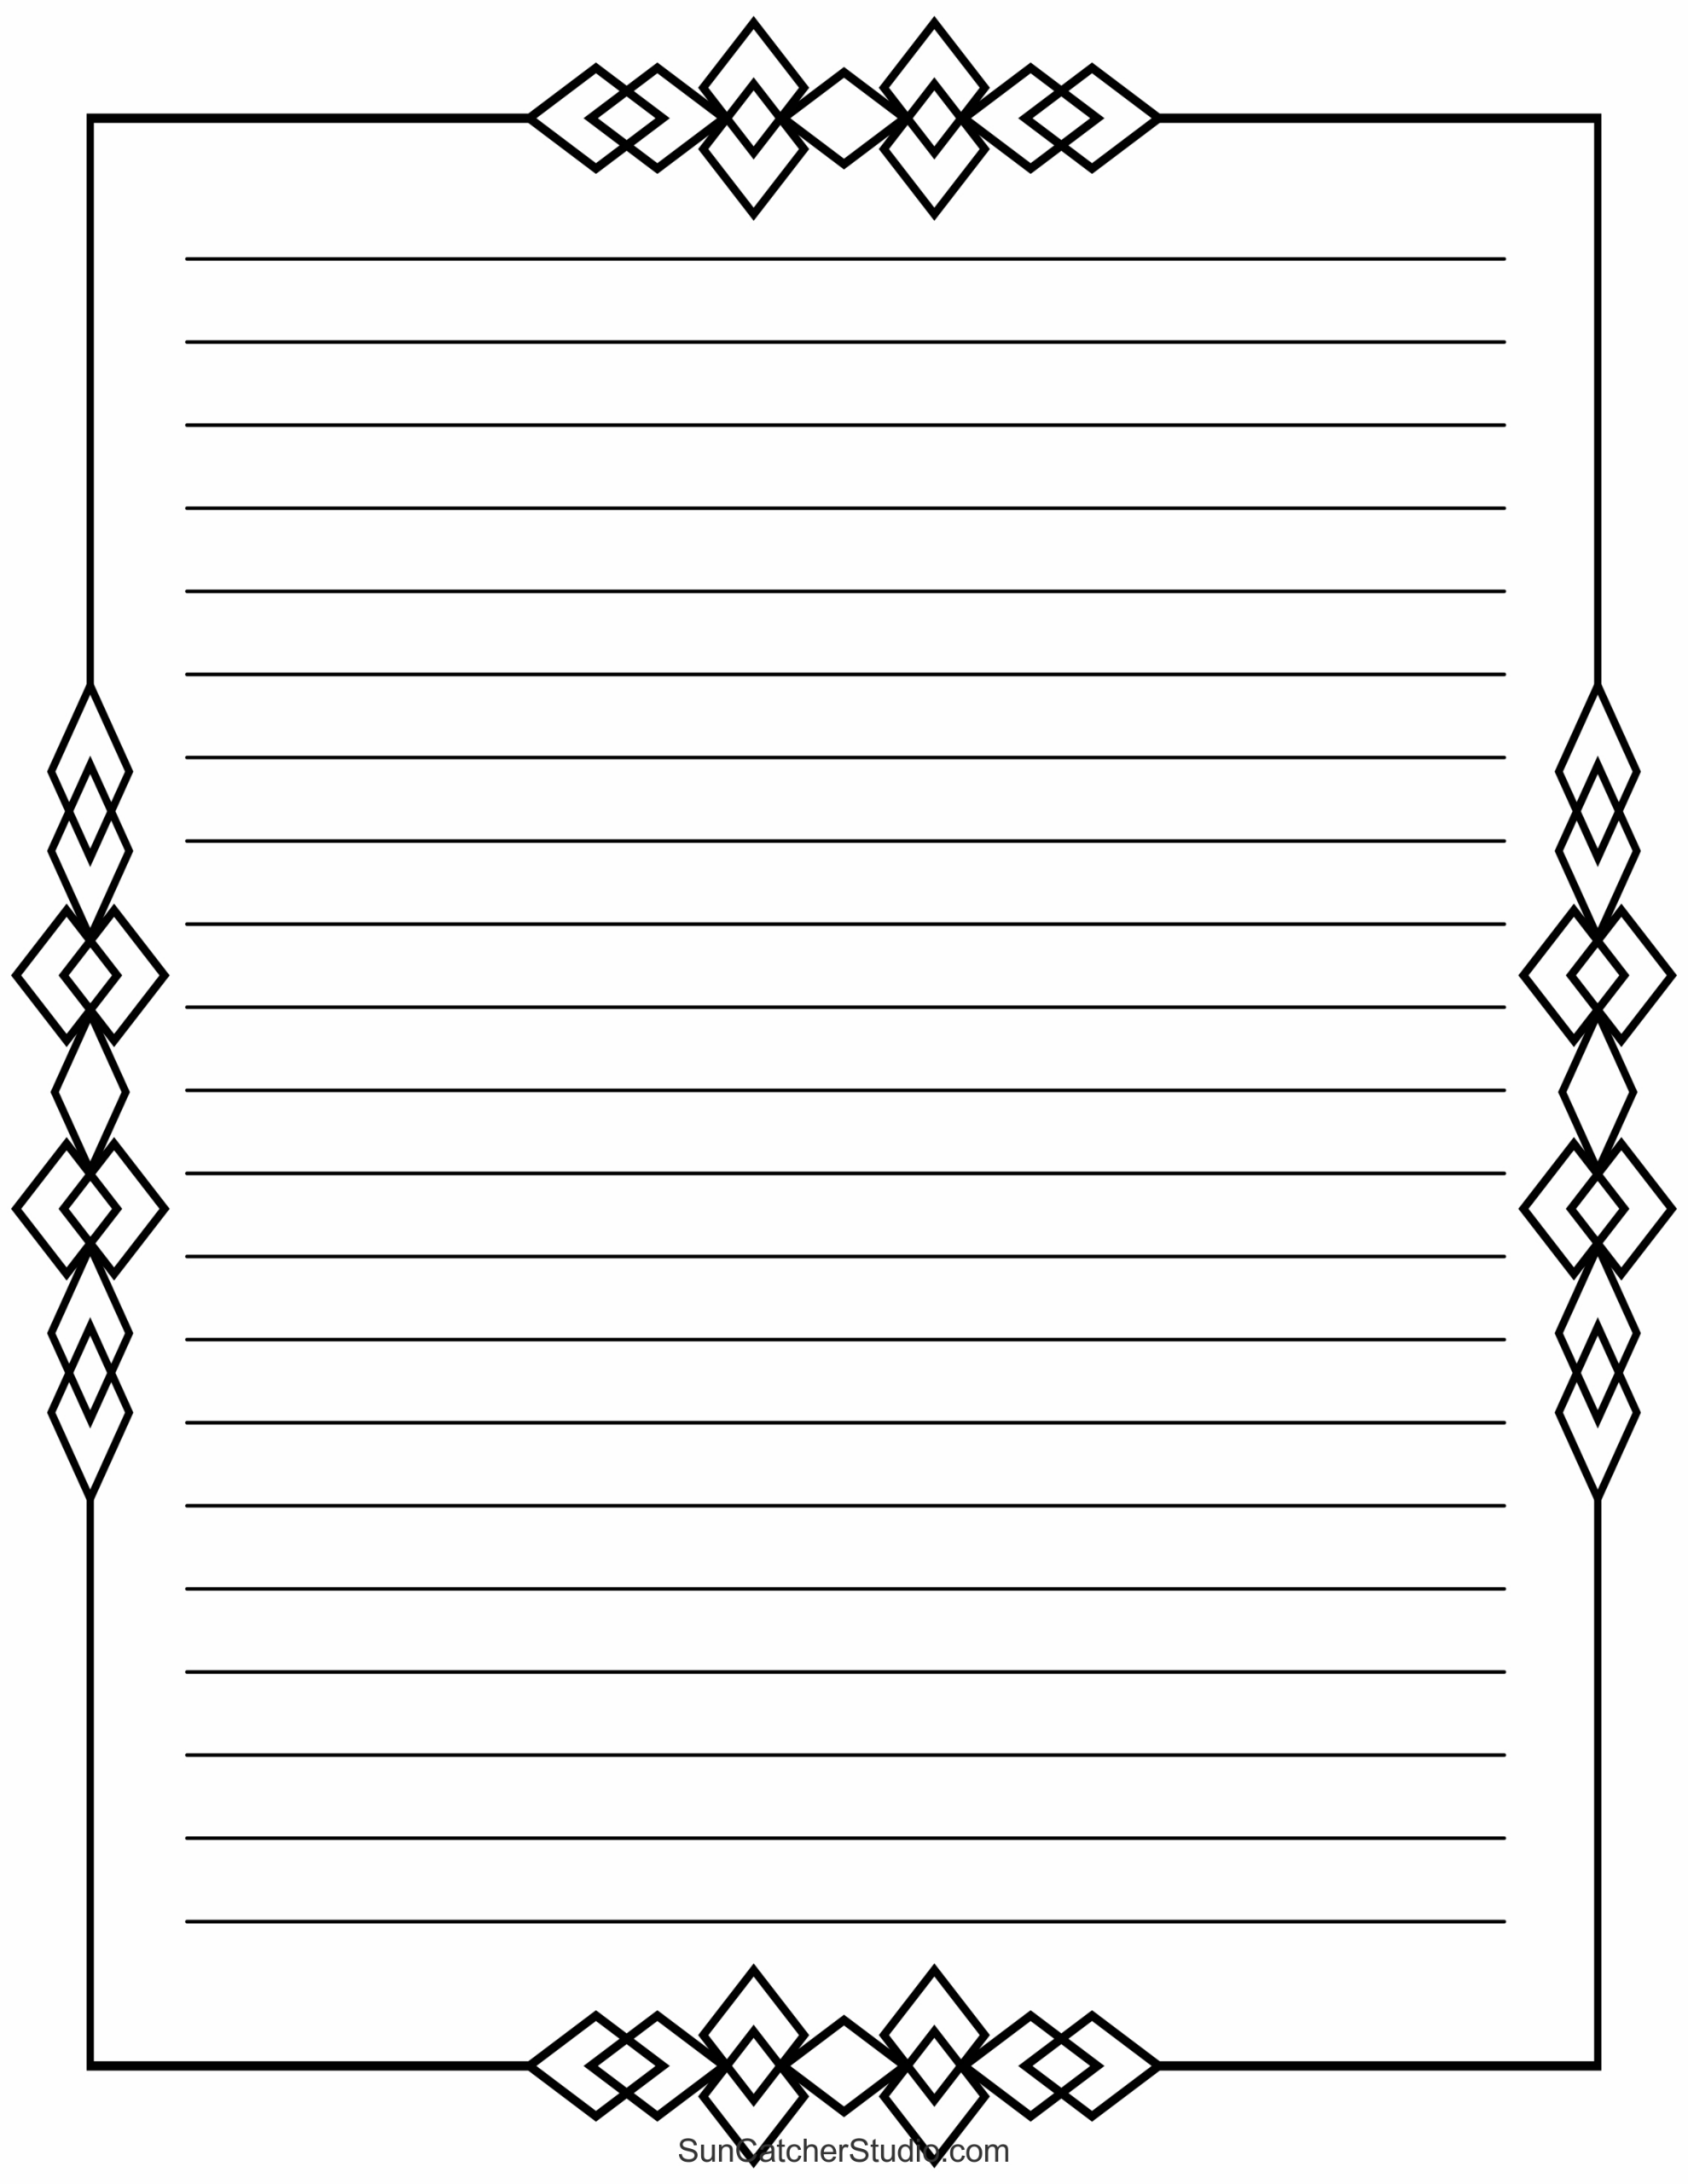 Free Printable Stationery And Lined Letter Writing Paper – Diy throughout Free Printable Lined Stationery